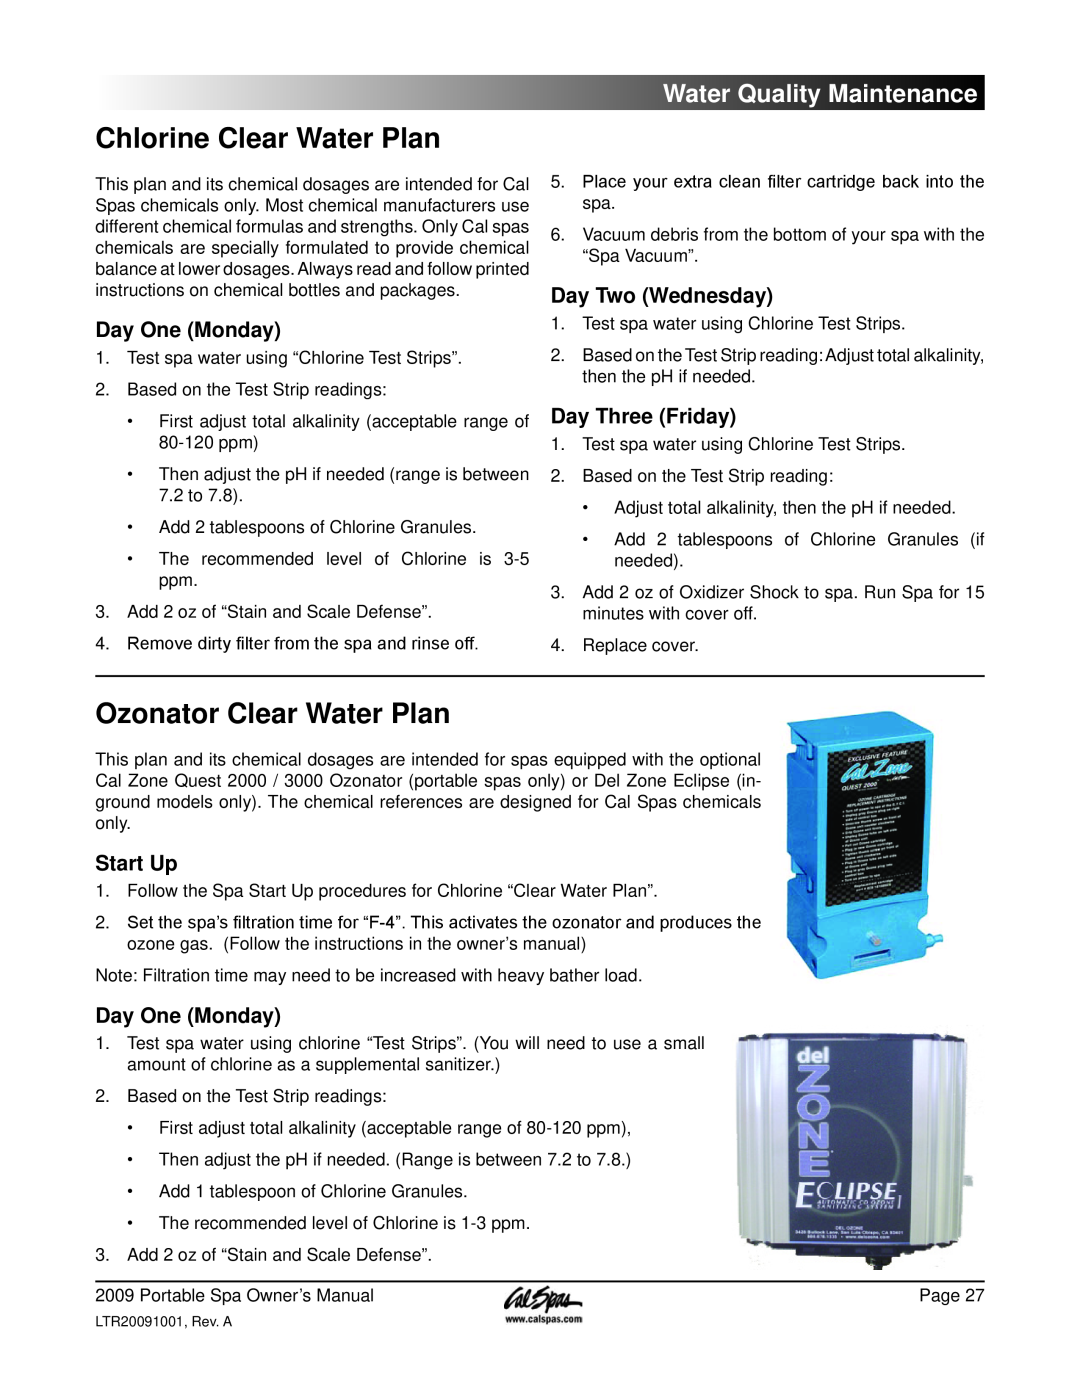 Cal Spas Portable Spas Chlorine Clear Water Plan, Ozonator Clear Water Plan, Water Quality Maintenance, Day One Monday 